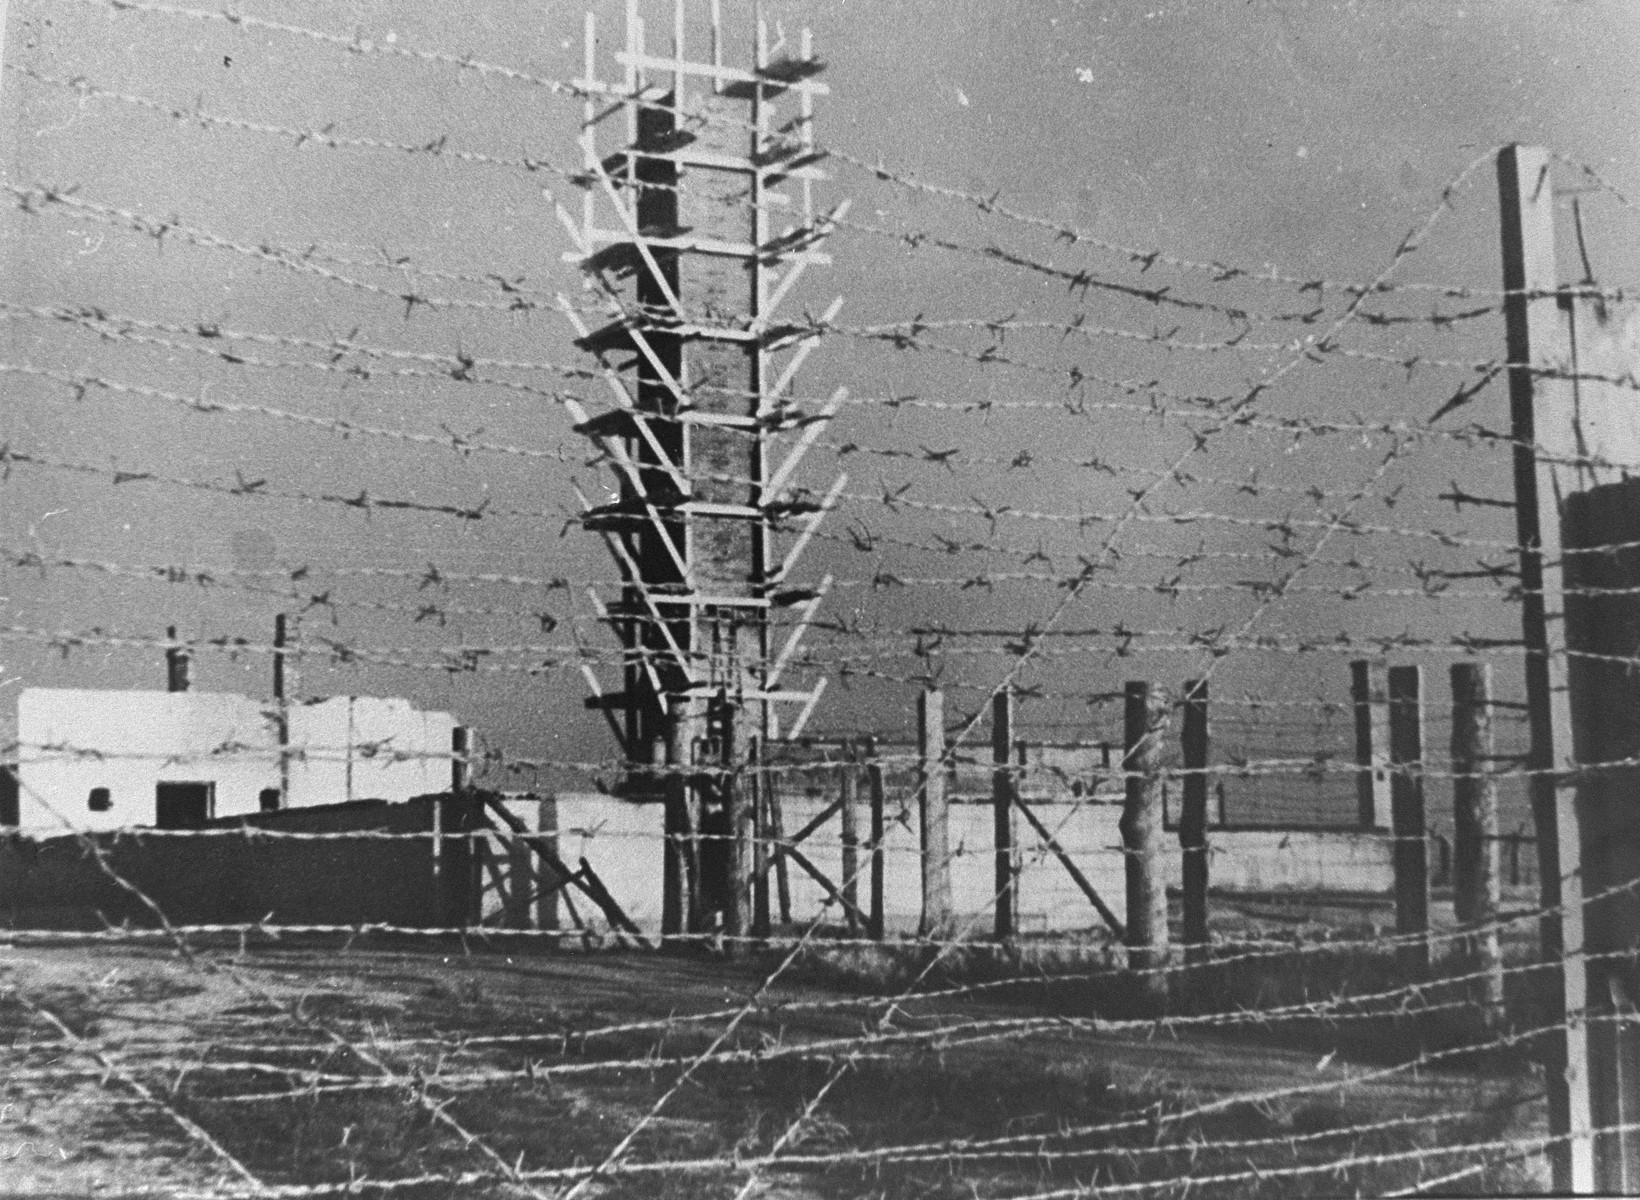 Postwar view of the crematoria and gas chamber in Majdanek through the barbed wire fence.